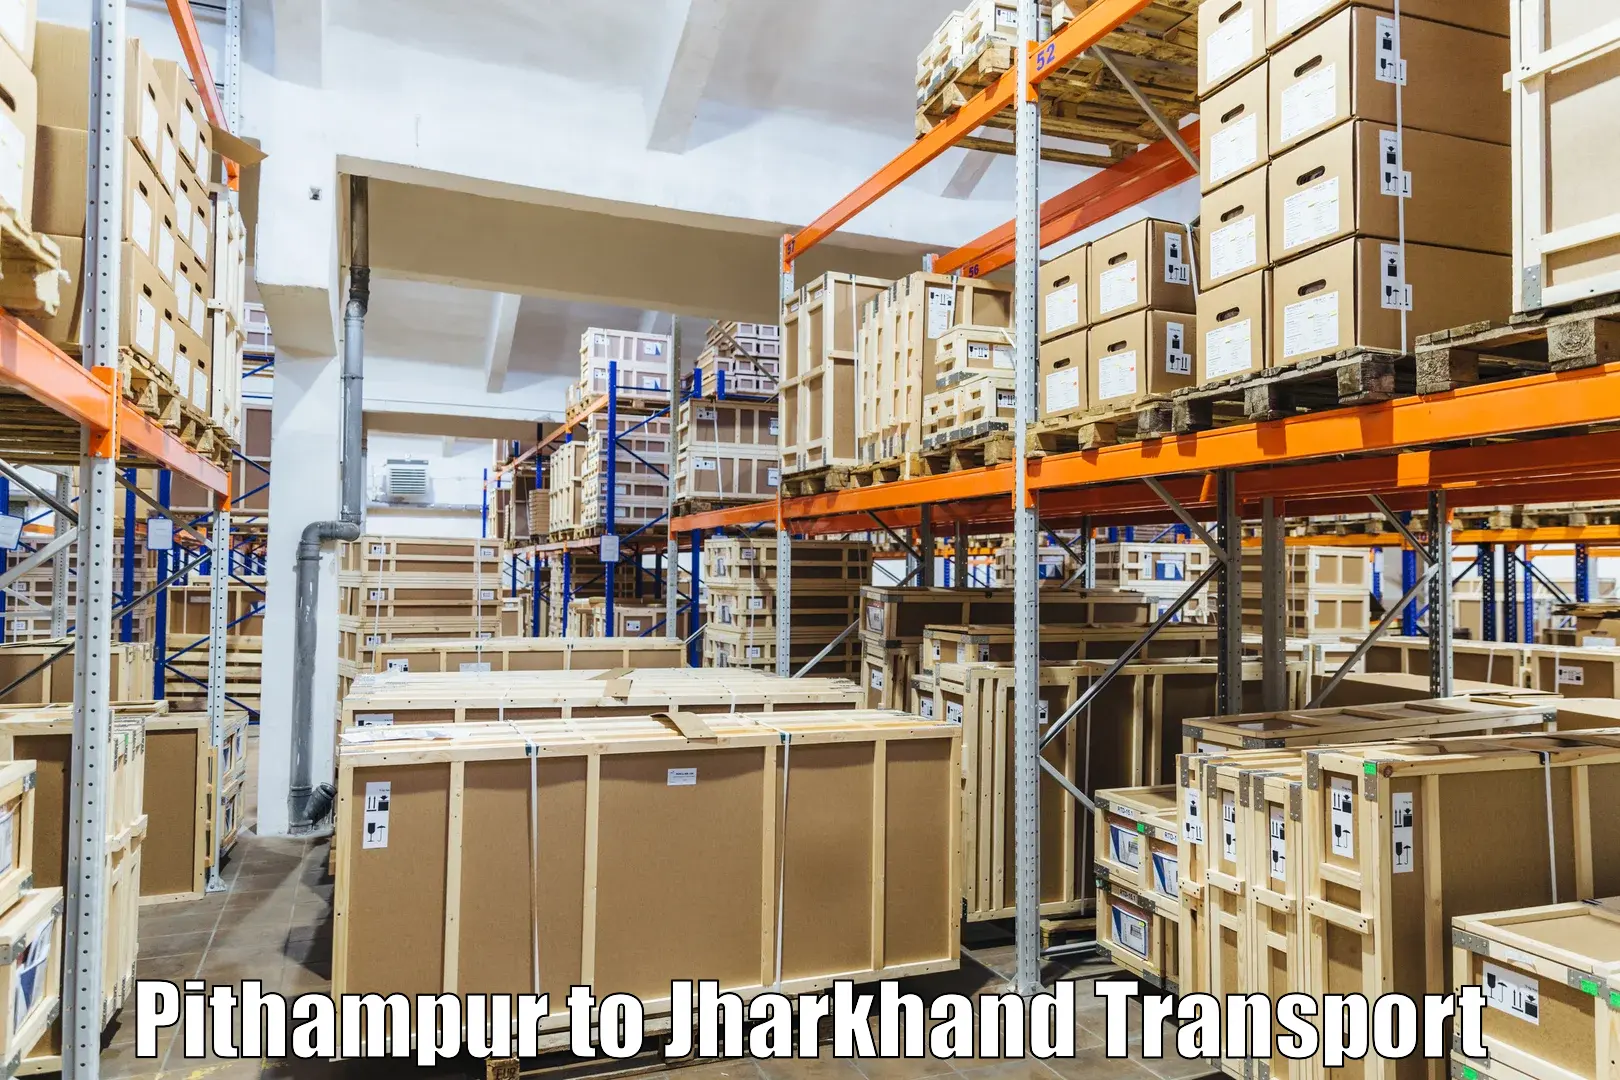 Container transport service Pithampur to Dumka